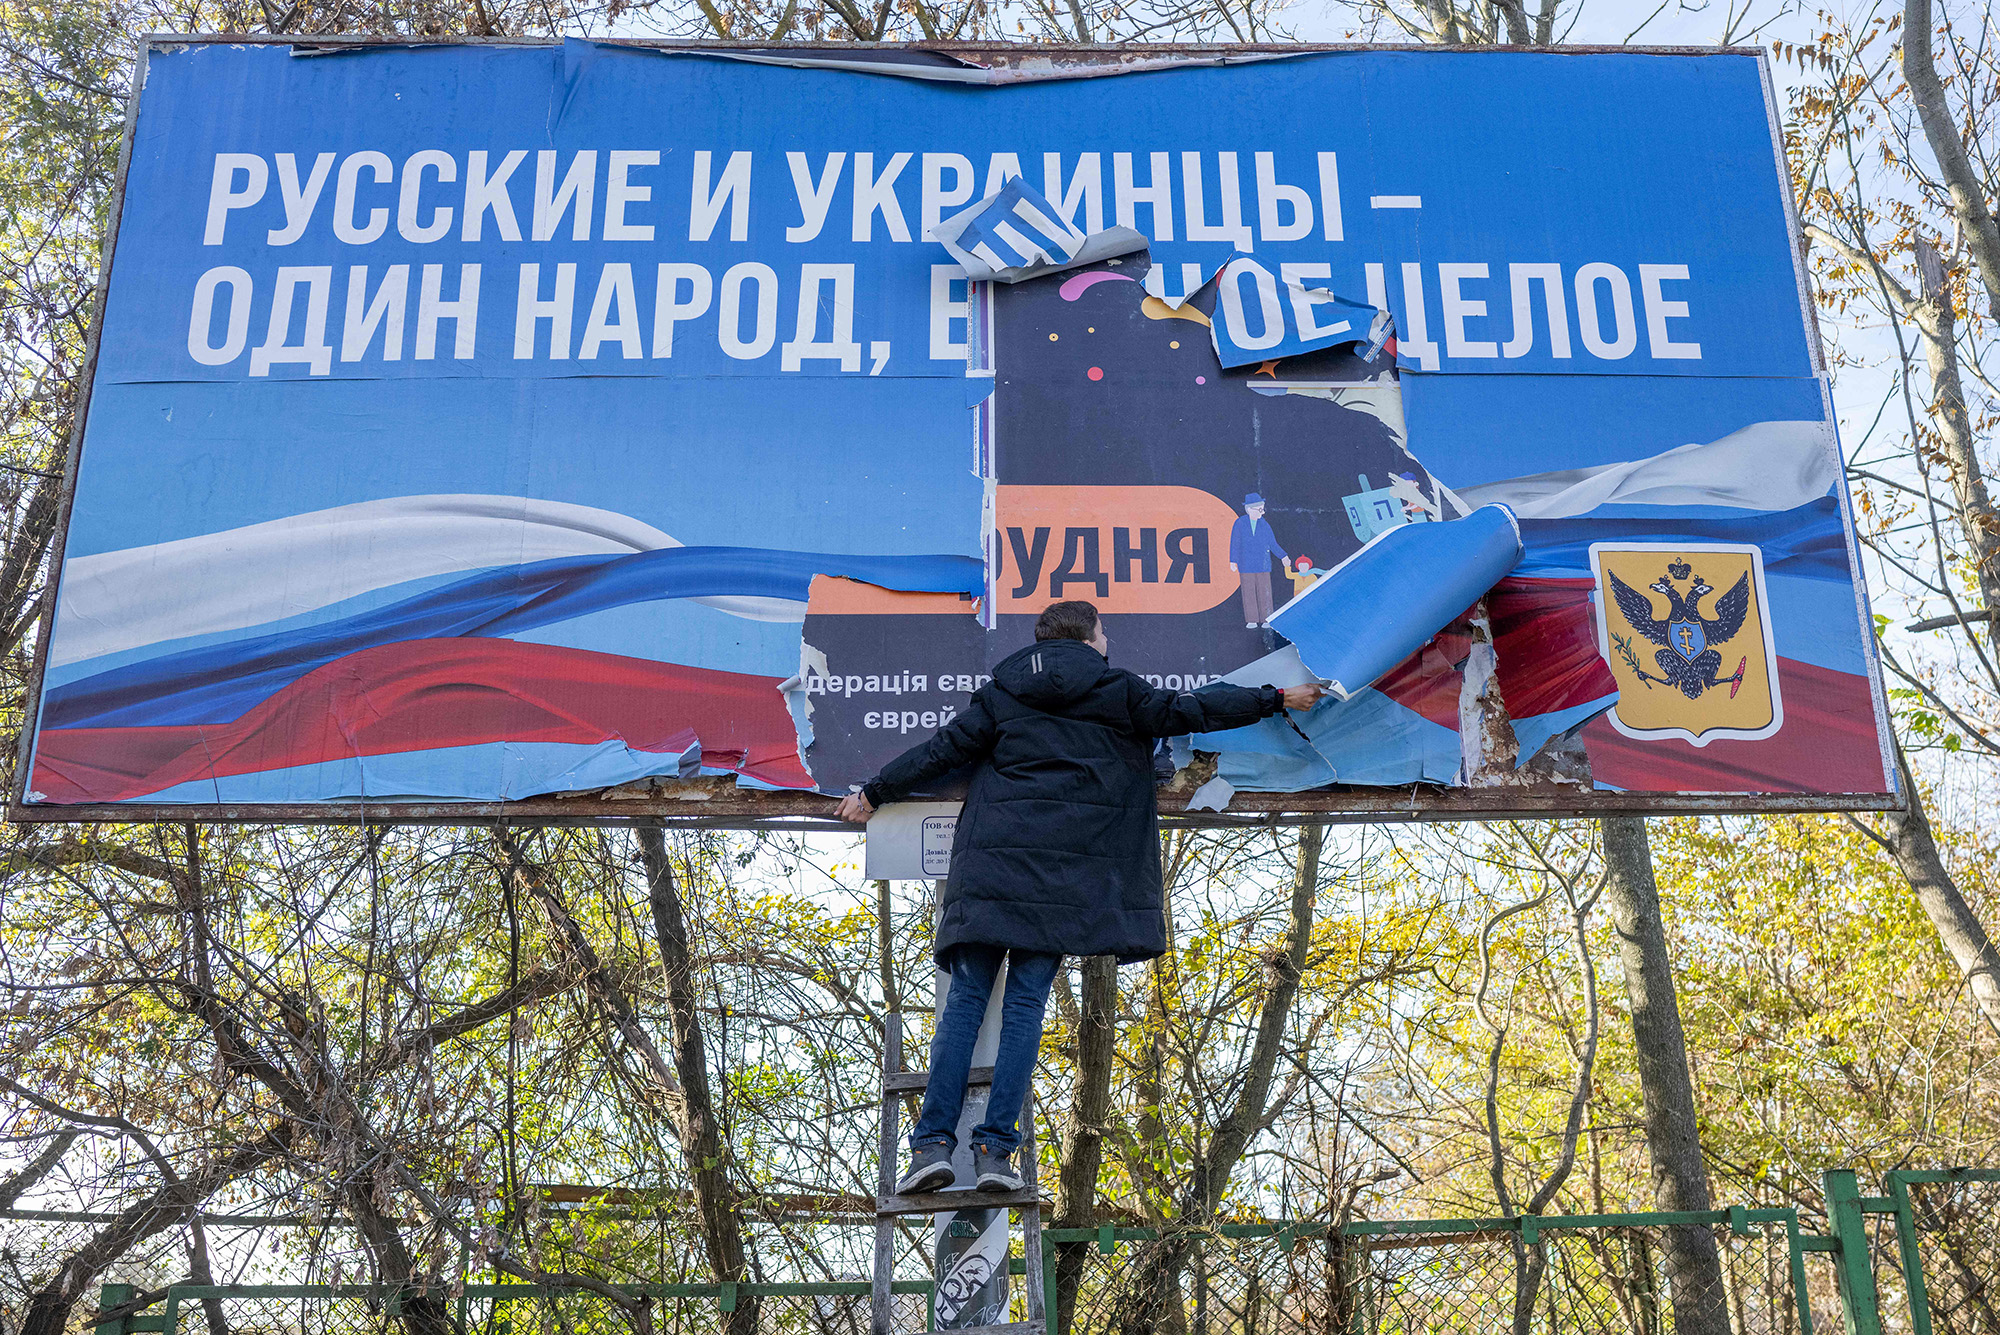 A man removes a banner from the Russian occupation period "Russians and Ukrainians are one people, one whole" in the newly liberated Kherson, Ukraine, on November 14.